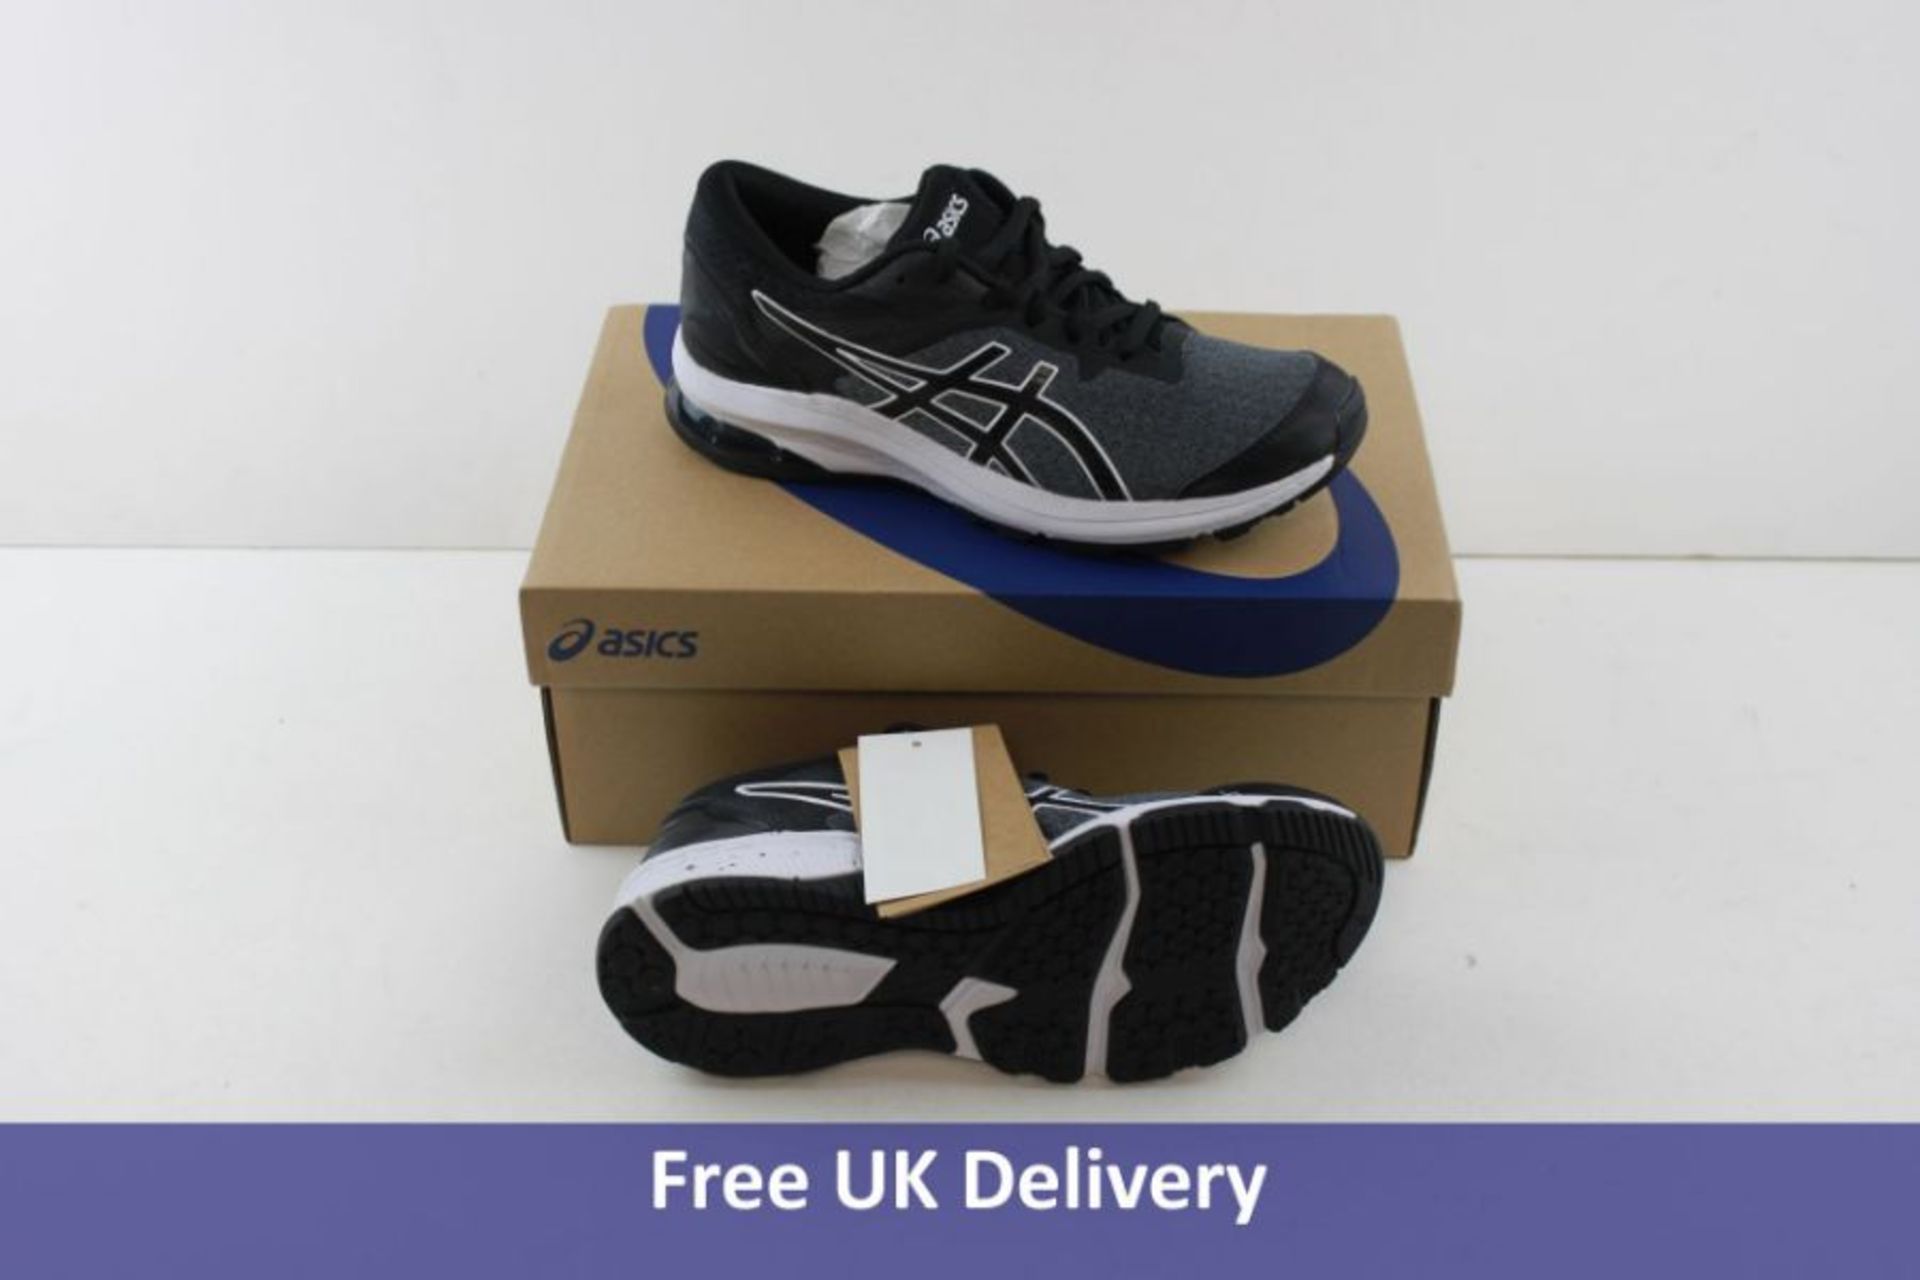 Asics Kid's GT-1000 10 GS Trainers, Black and White, UK 3.5